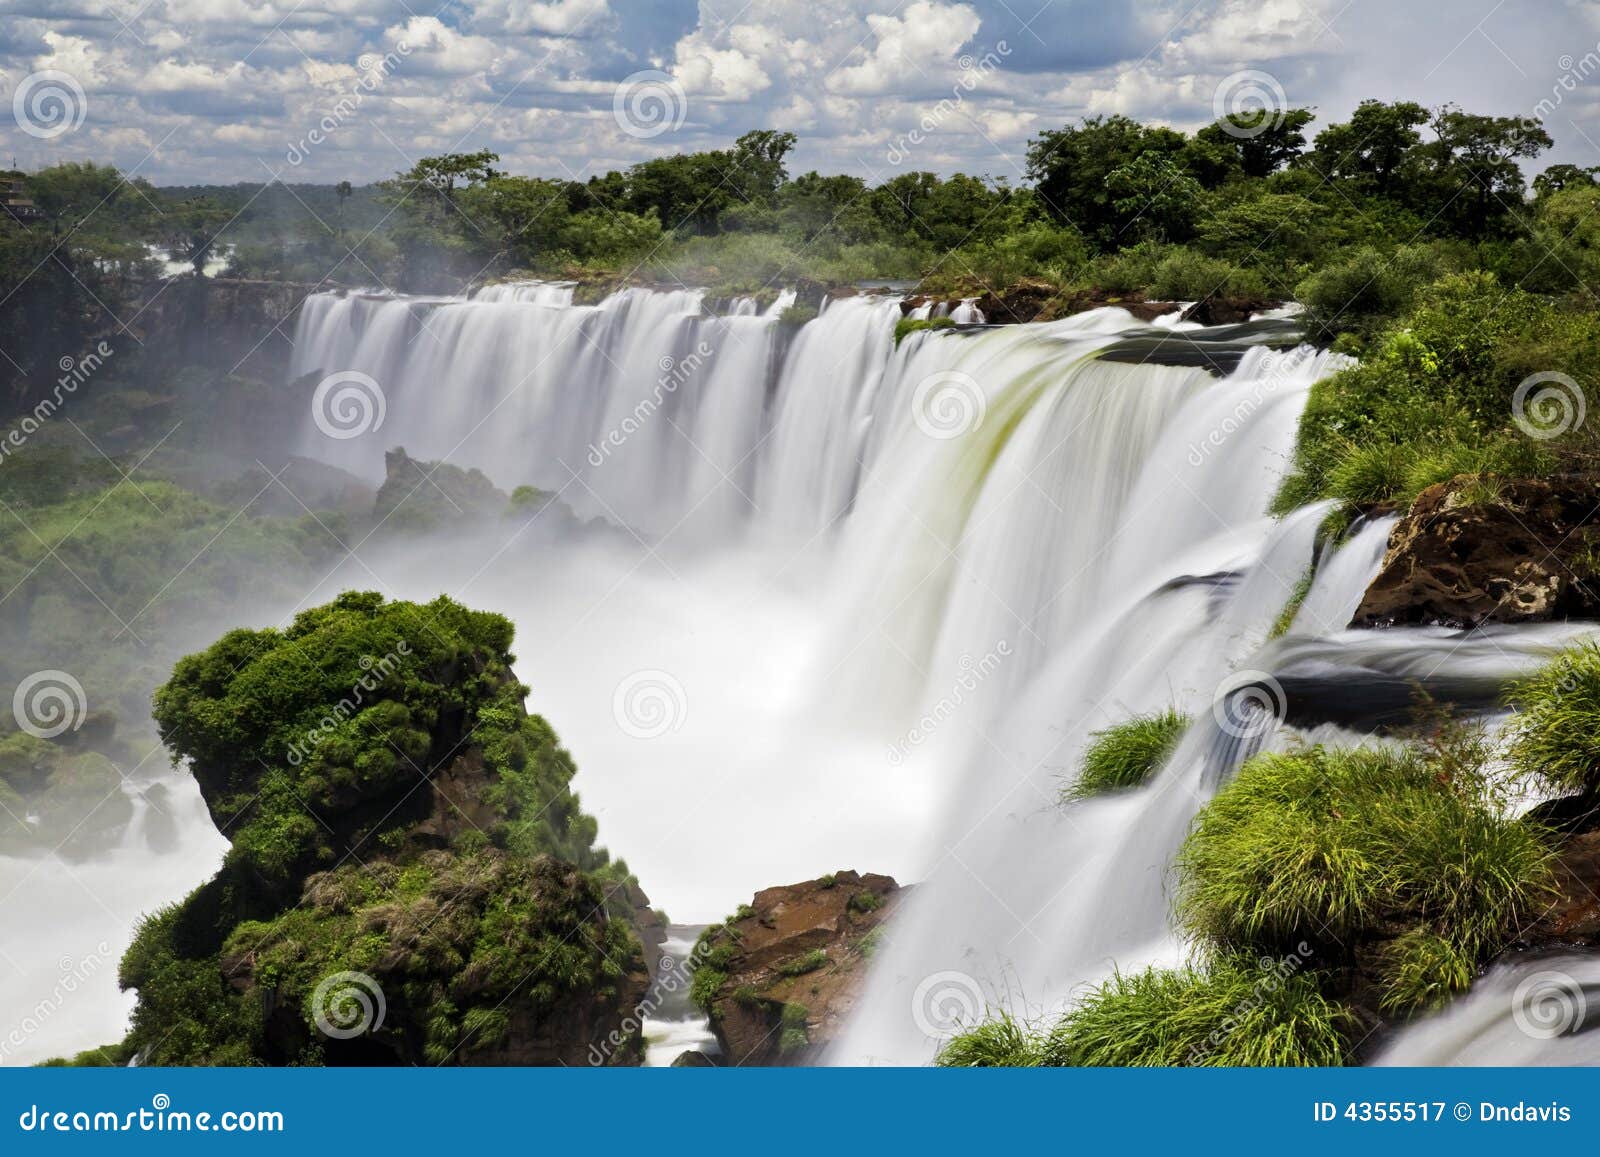 iguassu falls is the largest series of waterfalls on the planet